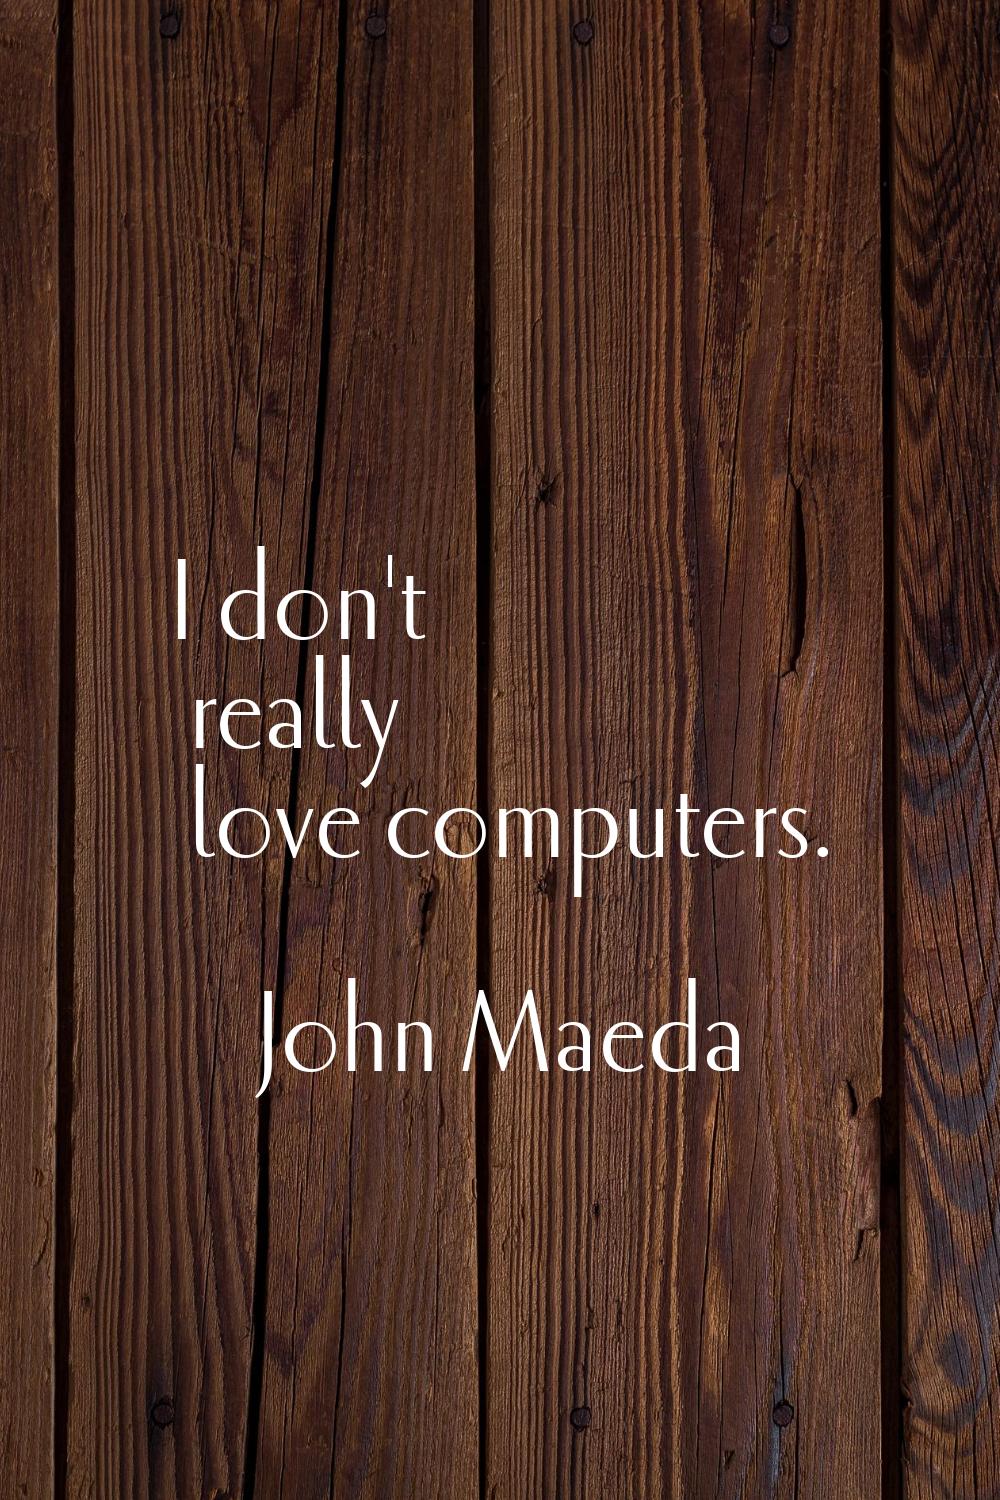 I don't really love computers.